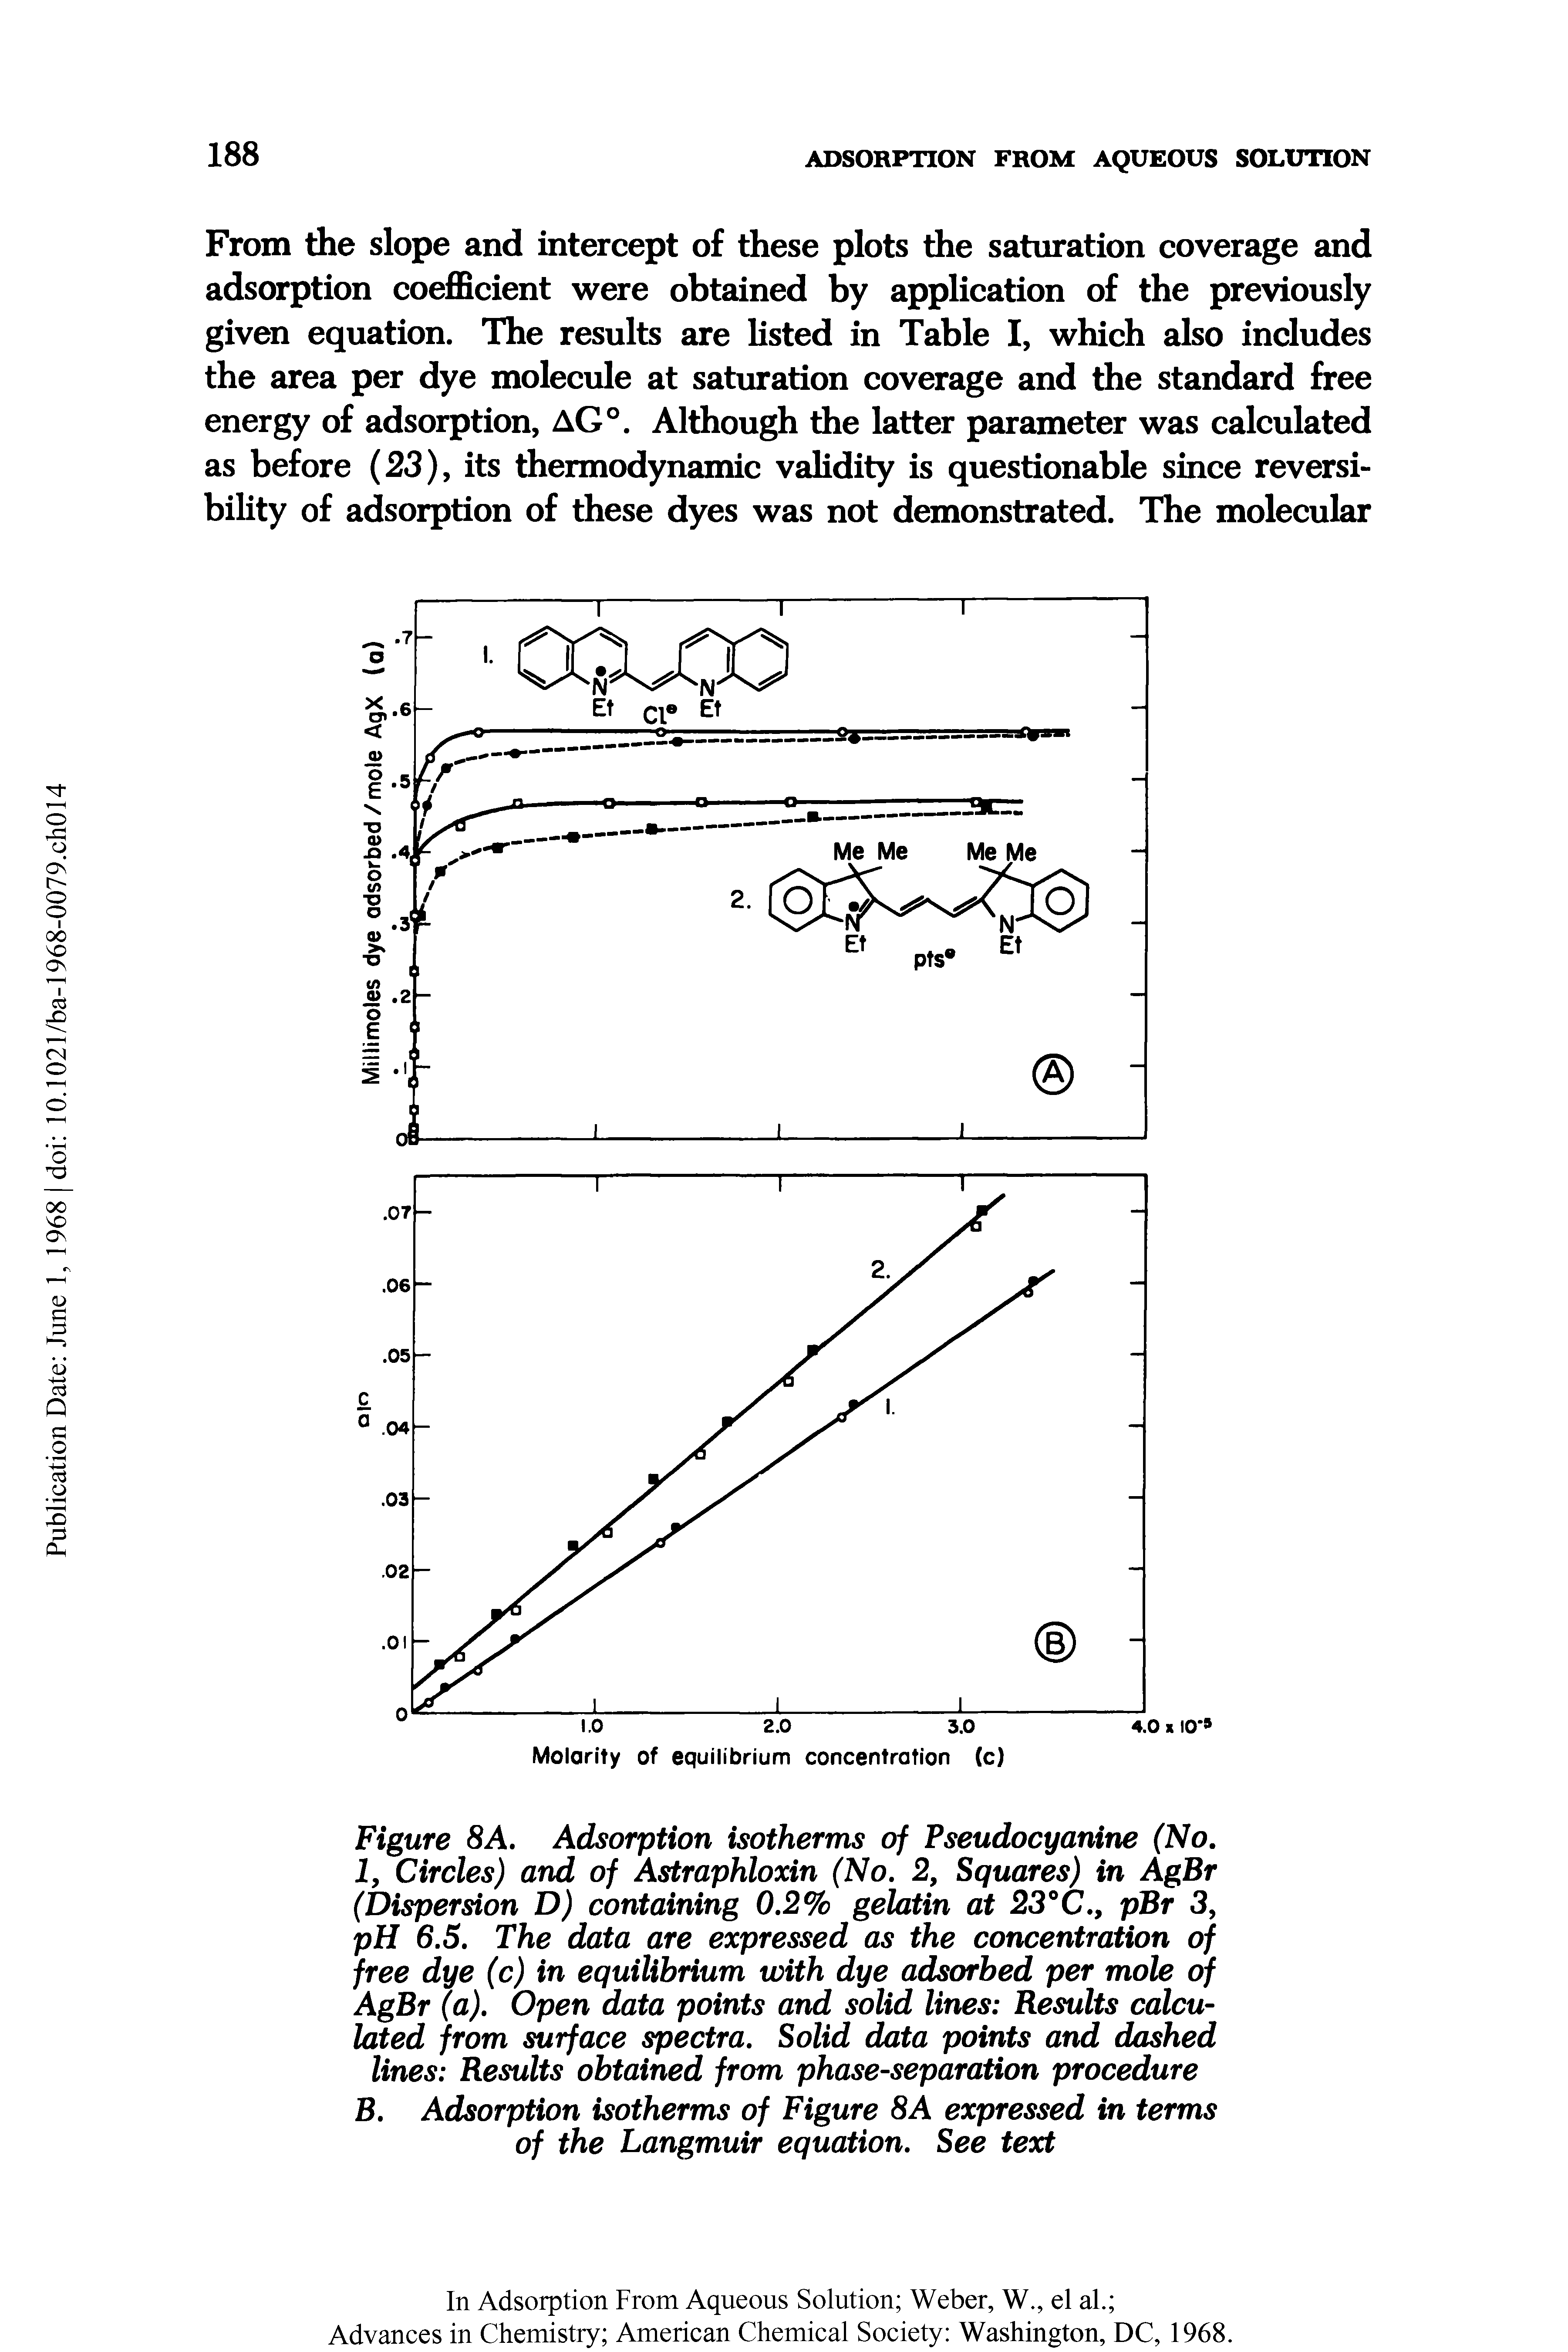 Figure 8A. Adsorption isotherms of Pseudocyanine (No. 1, Circles) and of Astraphloxin (No. 2, Squares) in AgBr (Dispersion D) containing 0.2% gelatin at 23°C., pBr 3, pH 6.5. The data are expressed as the concentration of free dye (c) in equilibrium with dye adsorbed per mole of AgBr (a). Open data points and solid lines Results calculated from surface spectra. Solid data points and dashed lines Results obtained from phase-separation procedure B. Adsorption isotherms of Figure 8A expressed in terms of the Langmuir equation. See text...